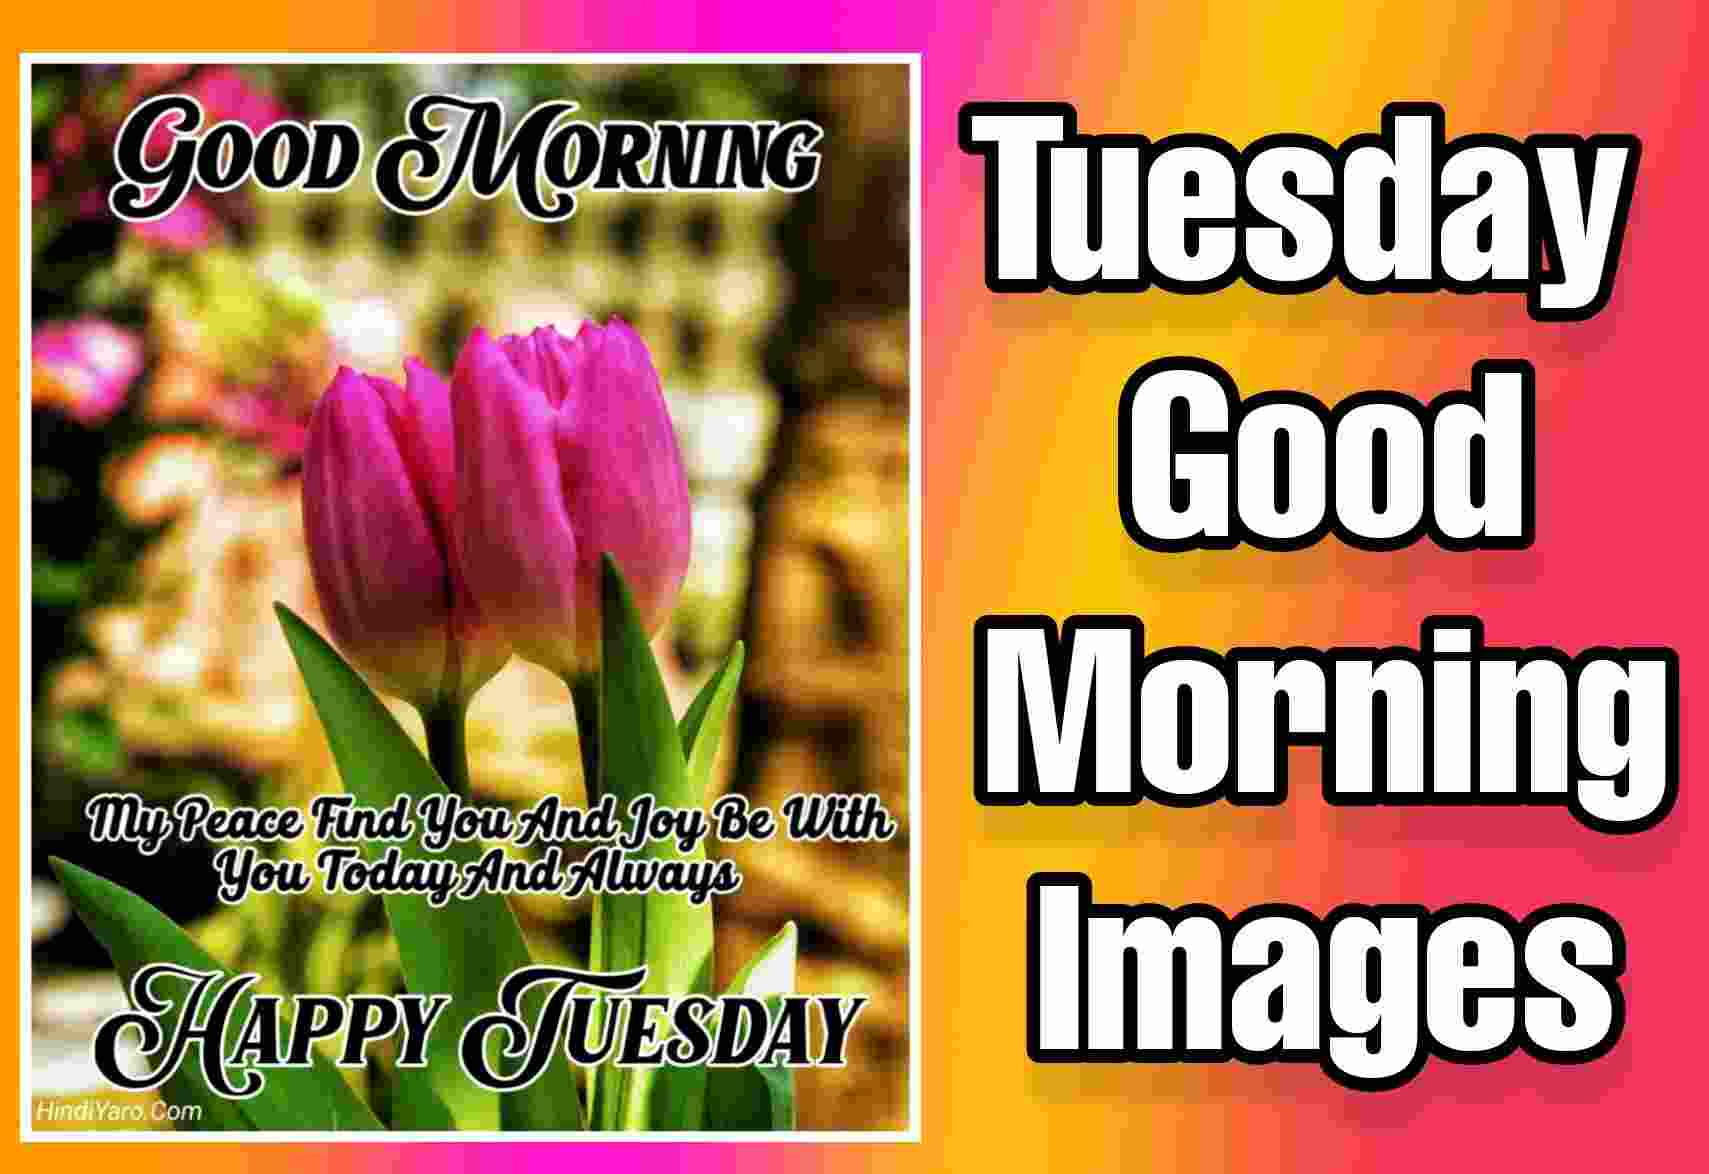 Tuesday Good Morning Images | Good Morning Happy Tuesday